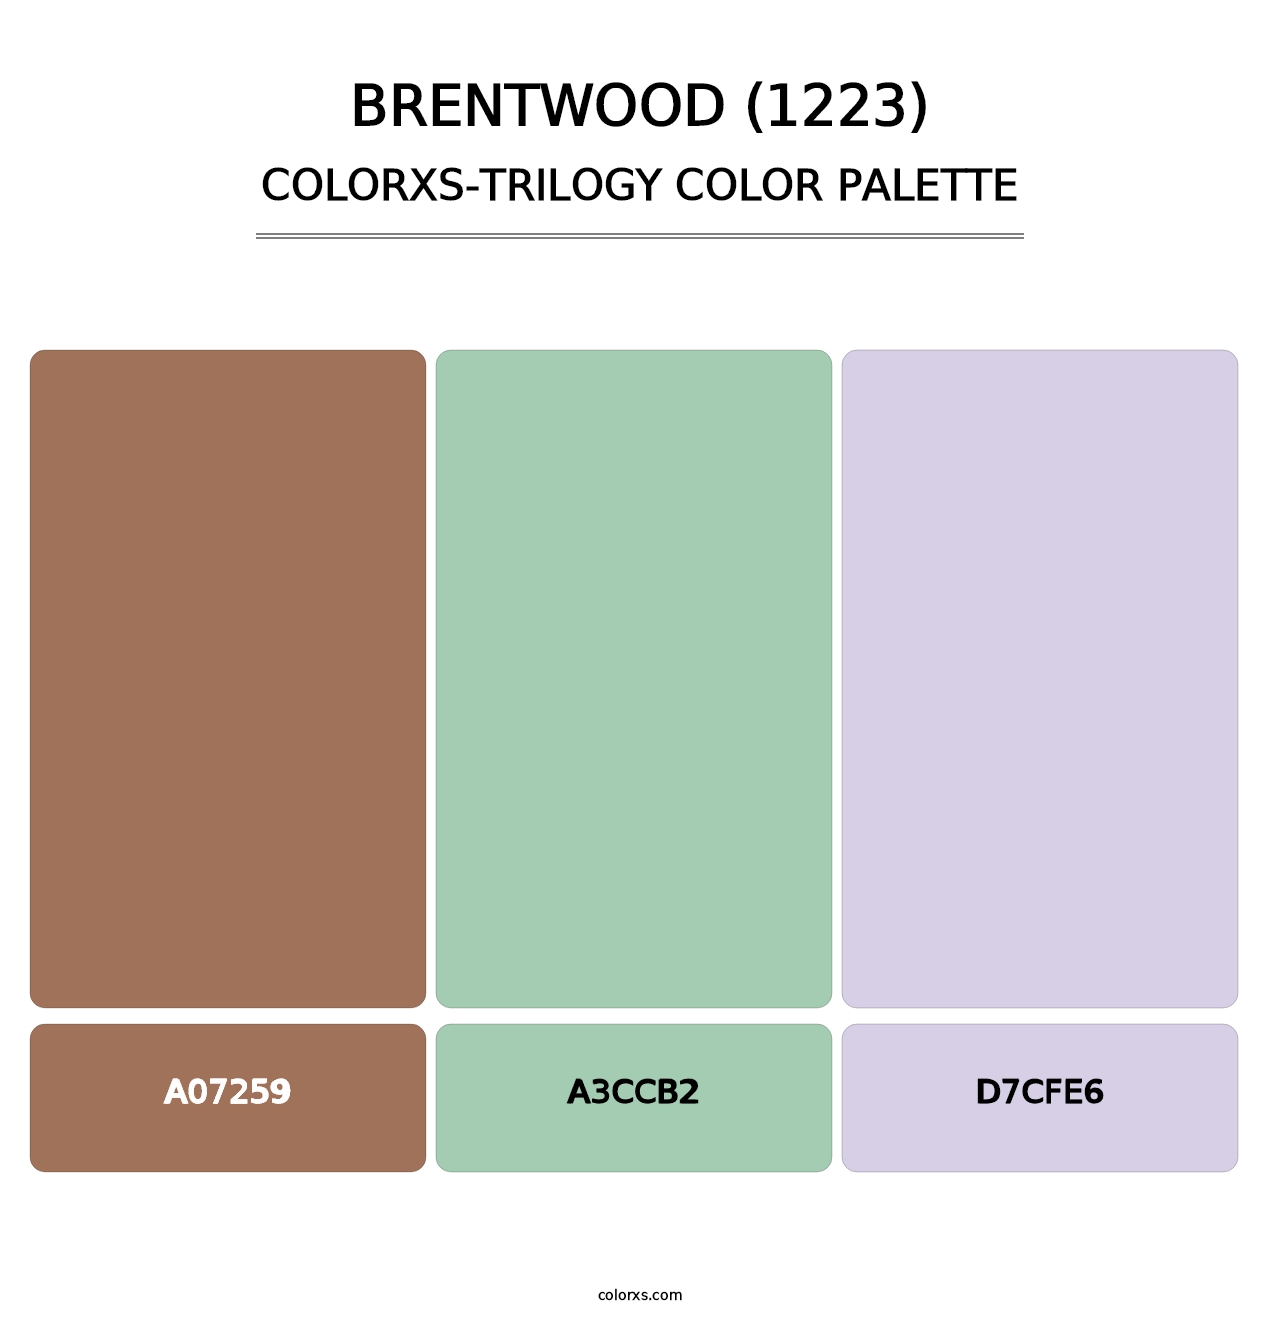 Brentwood (1223) - Colorxs Trilogy Palette